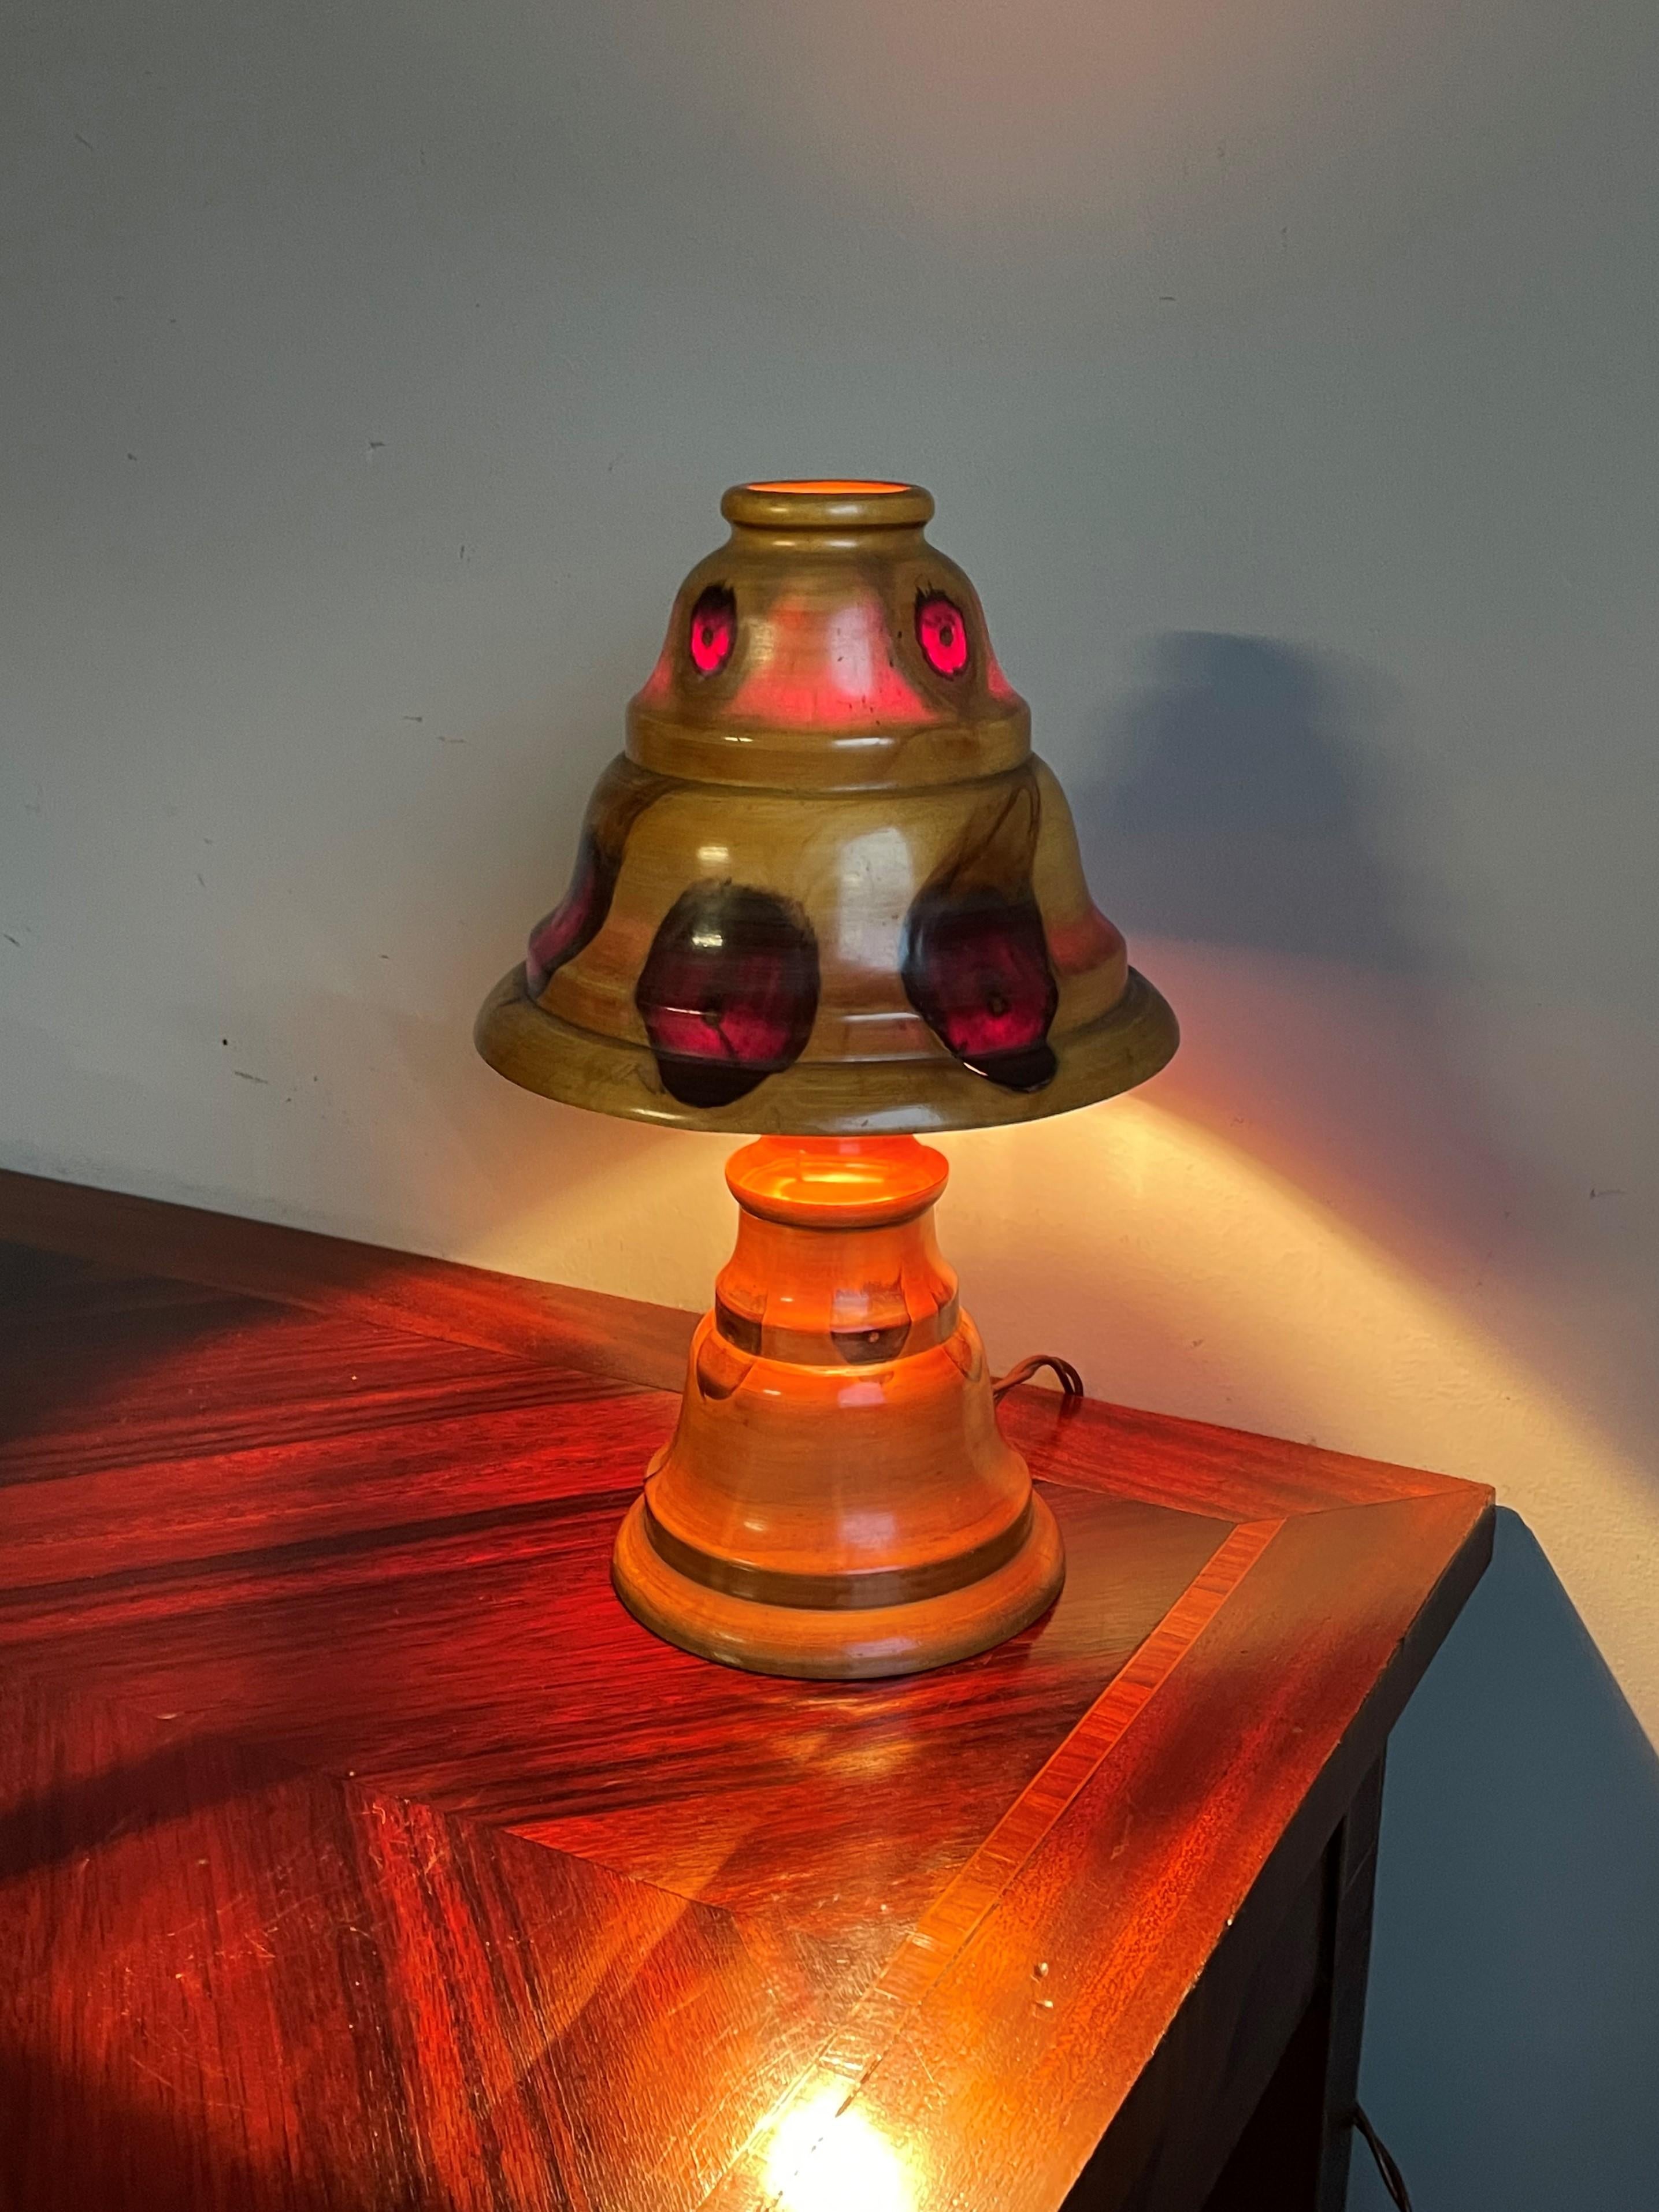 Rare and beautiful shape, wooden table lamp with all natural colors.

This midcentury era, mushroom shape table lamp has some of the most beautiful, natural colors you will ever see. We don't know what type of wood this lamp is made of, but this